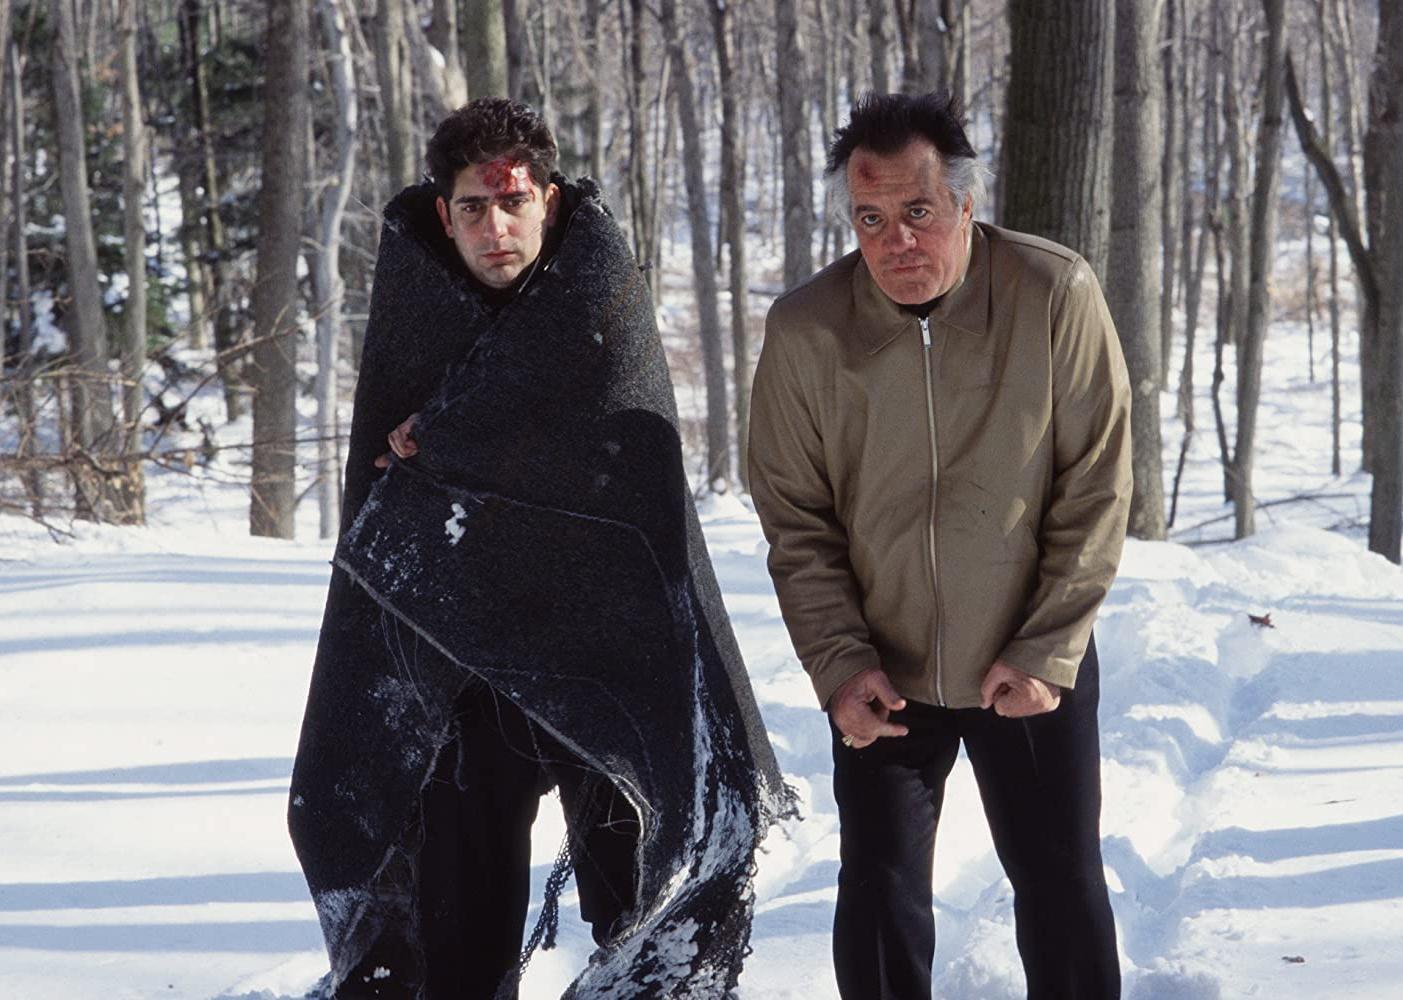 Michael Imperioli and Tony Sirico walking in the snow with injuries.